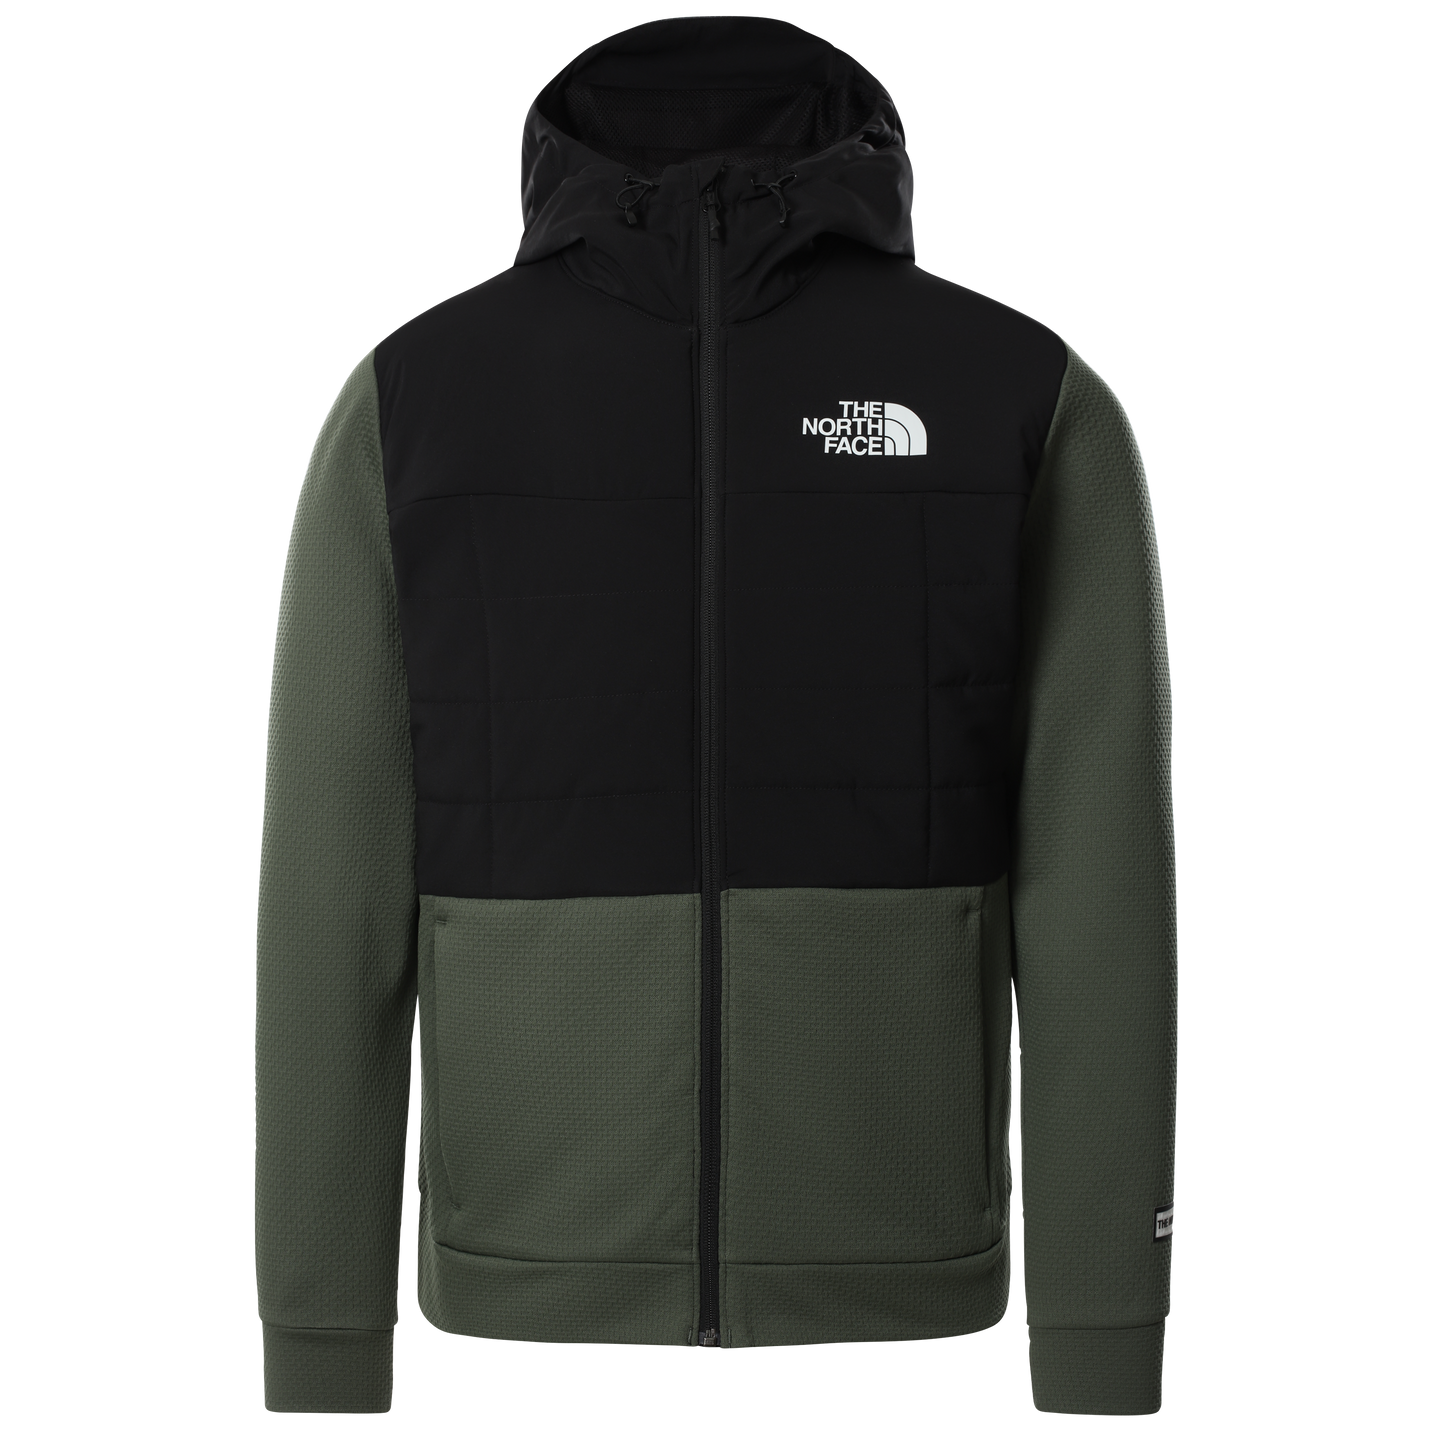 The North Face MA Insulated Jacket